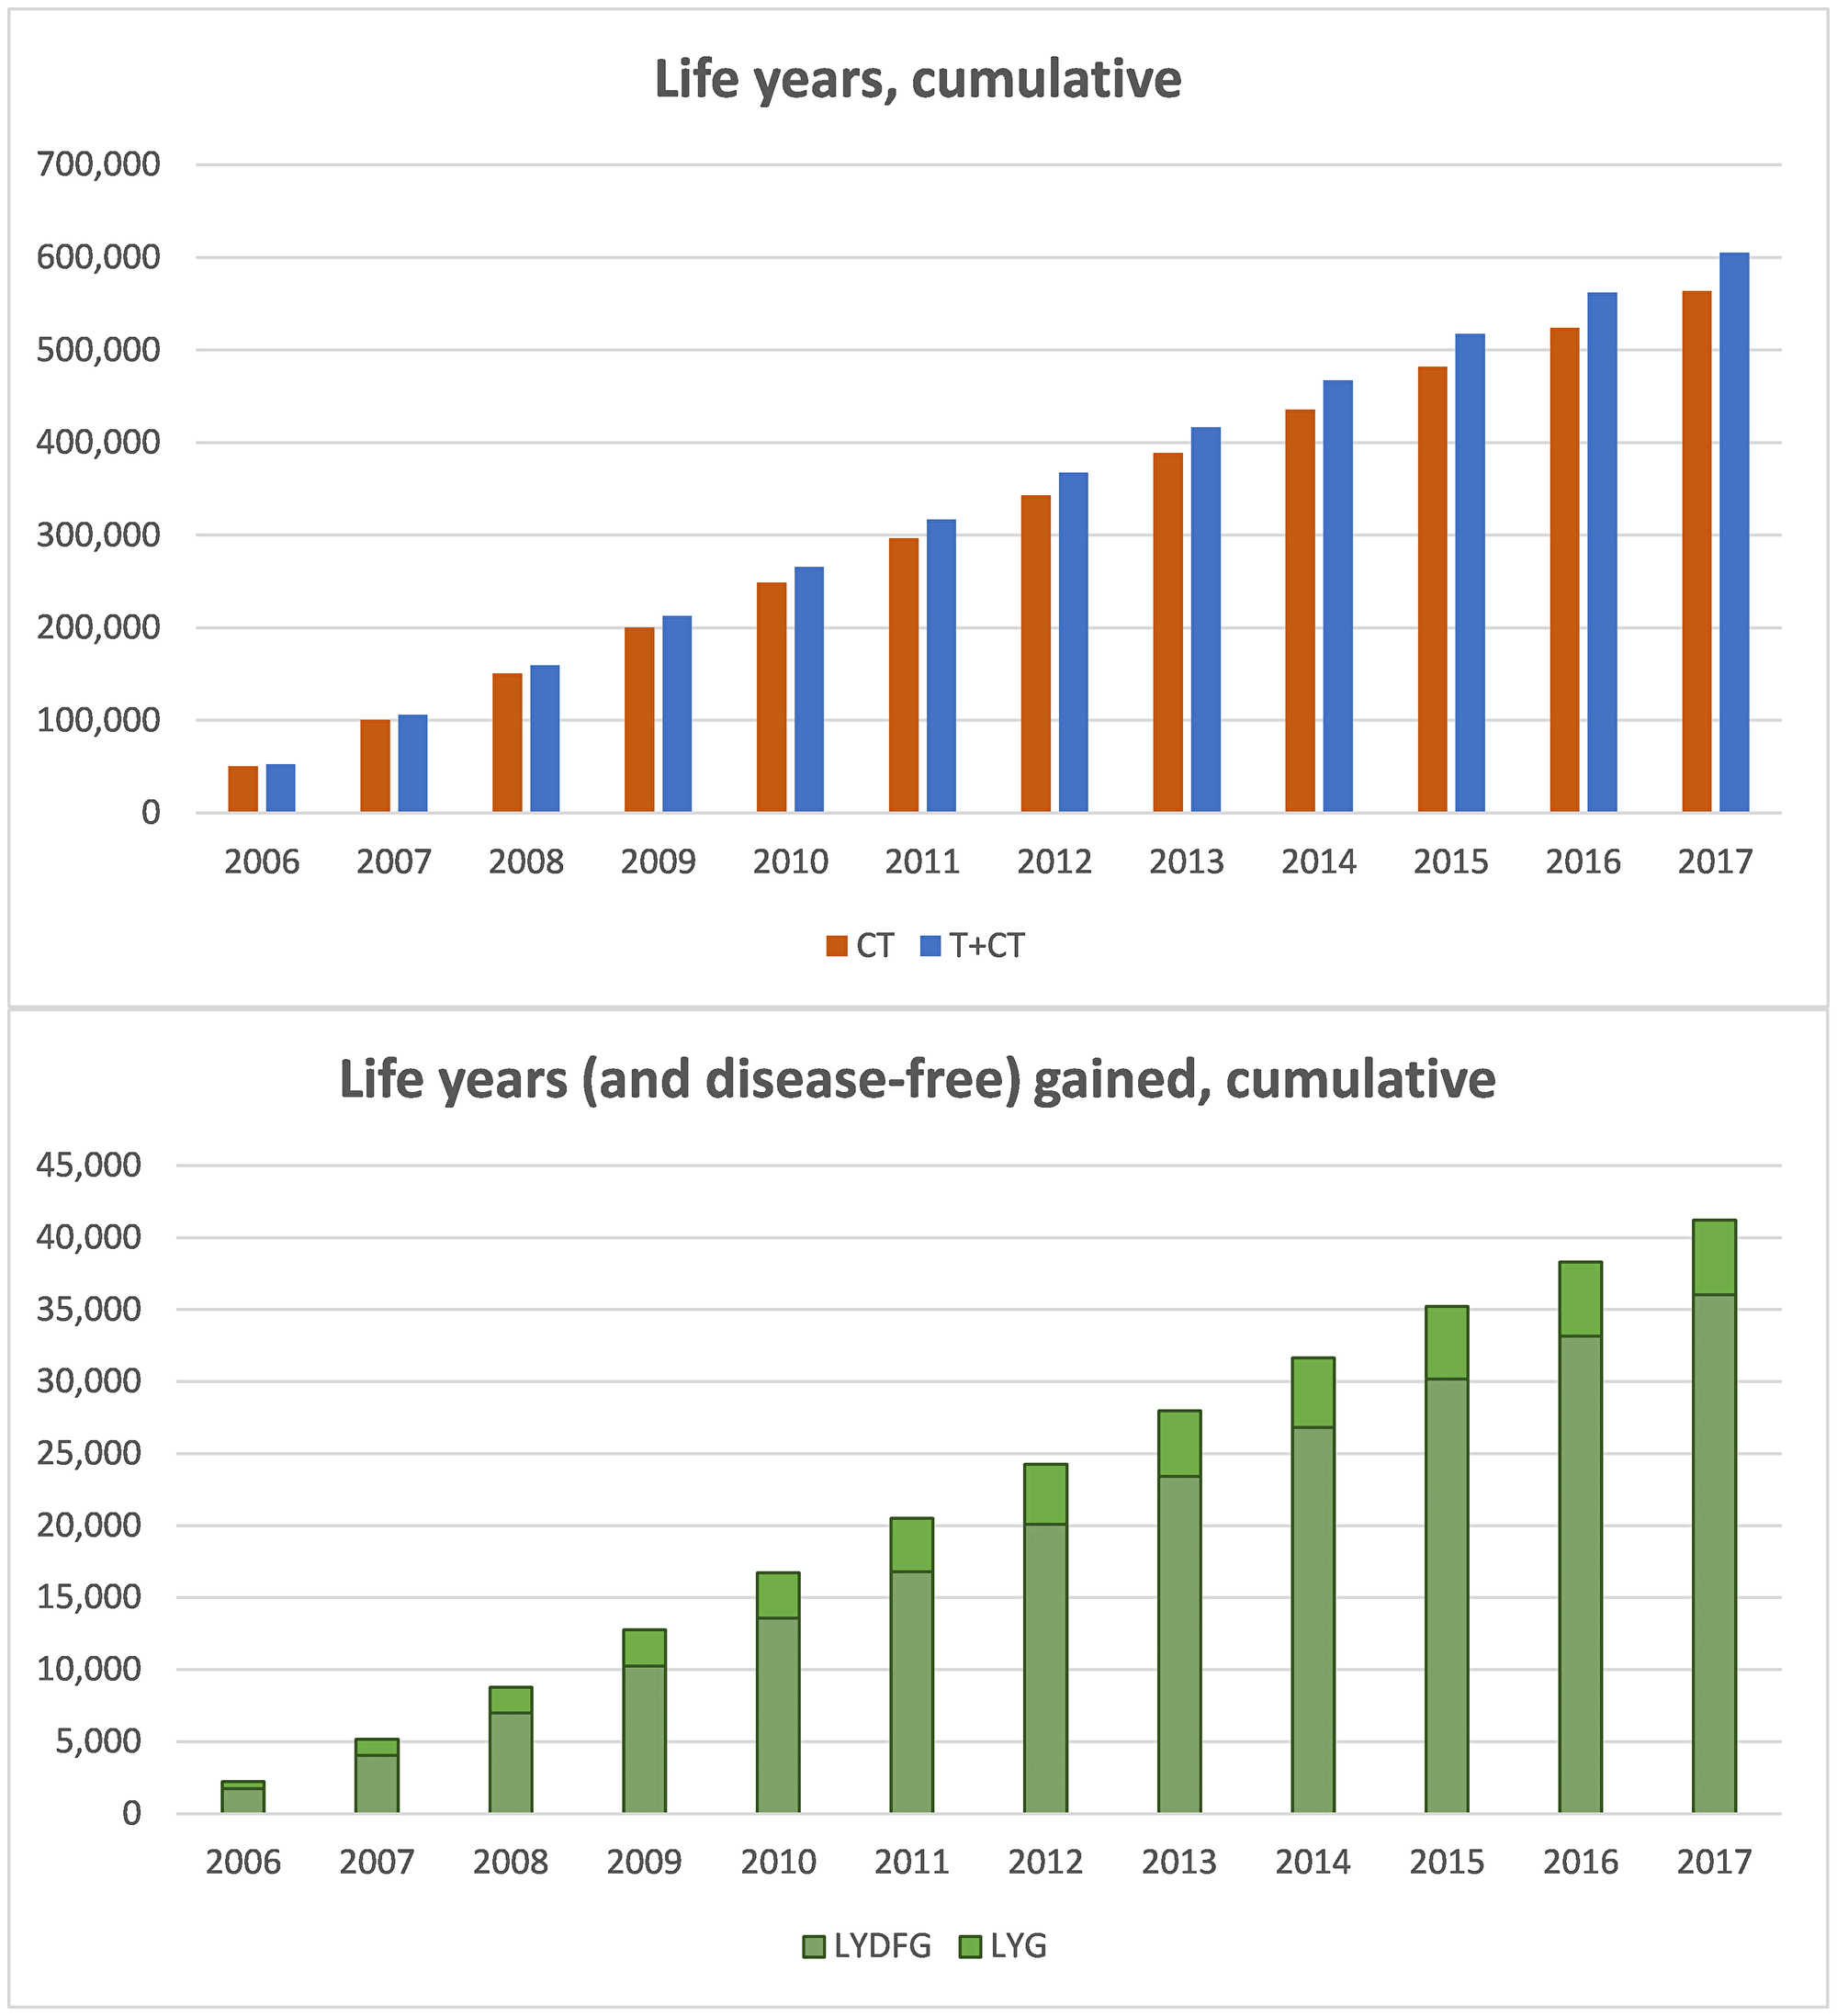 Cumulative results of life years and disease-free life years, follow-up until 2035.